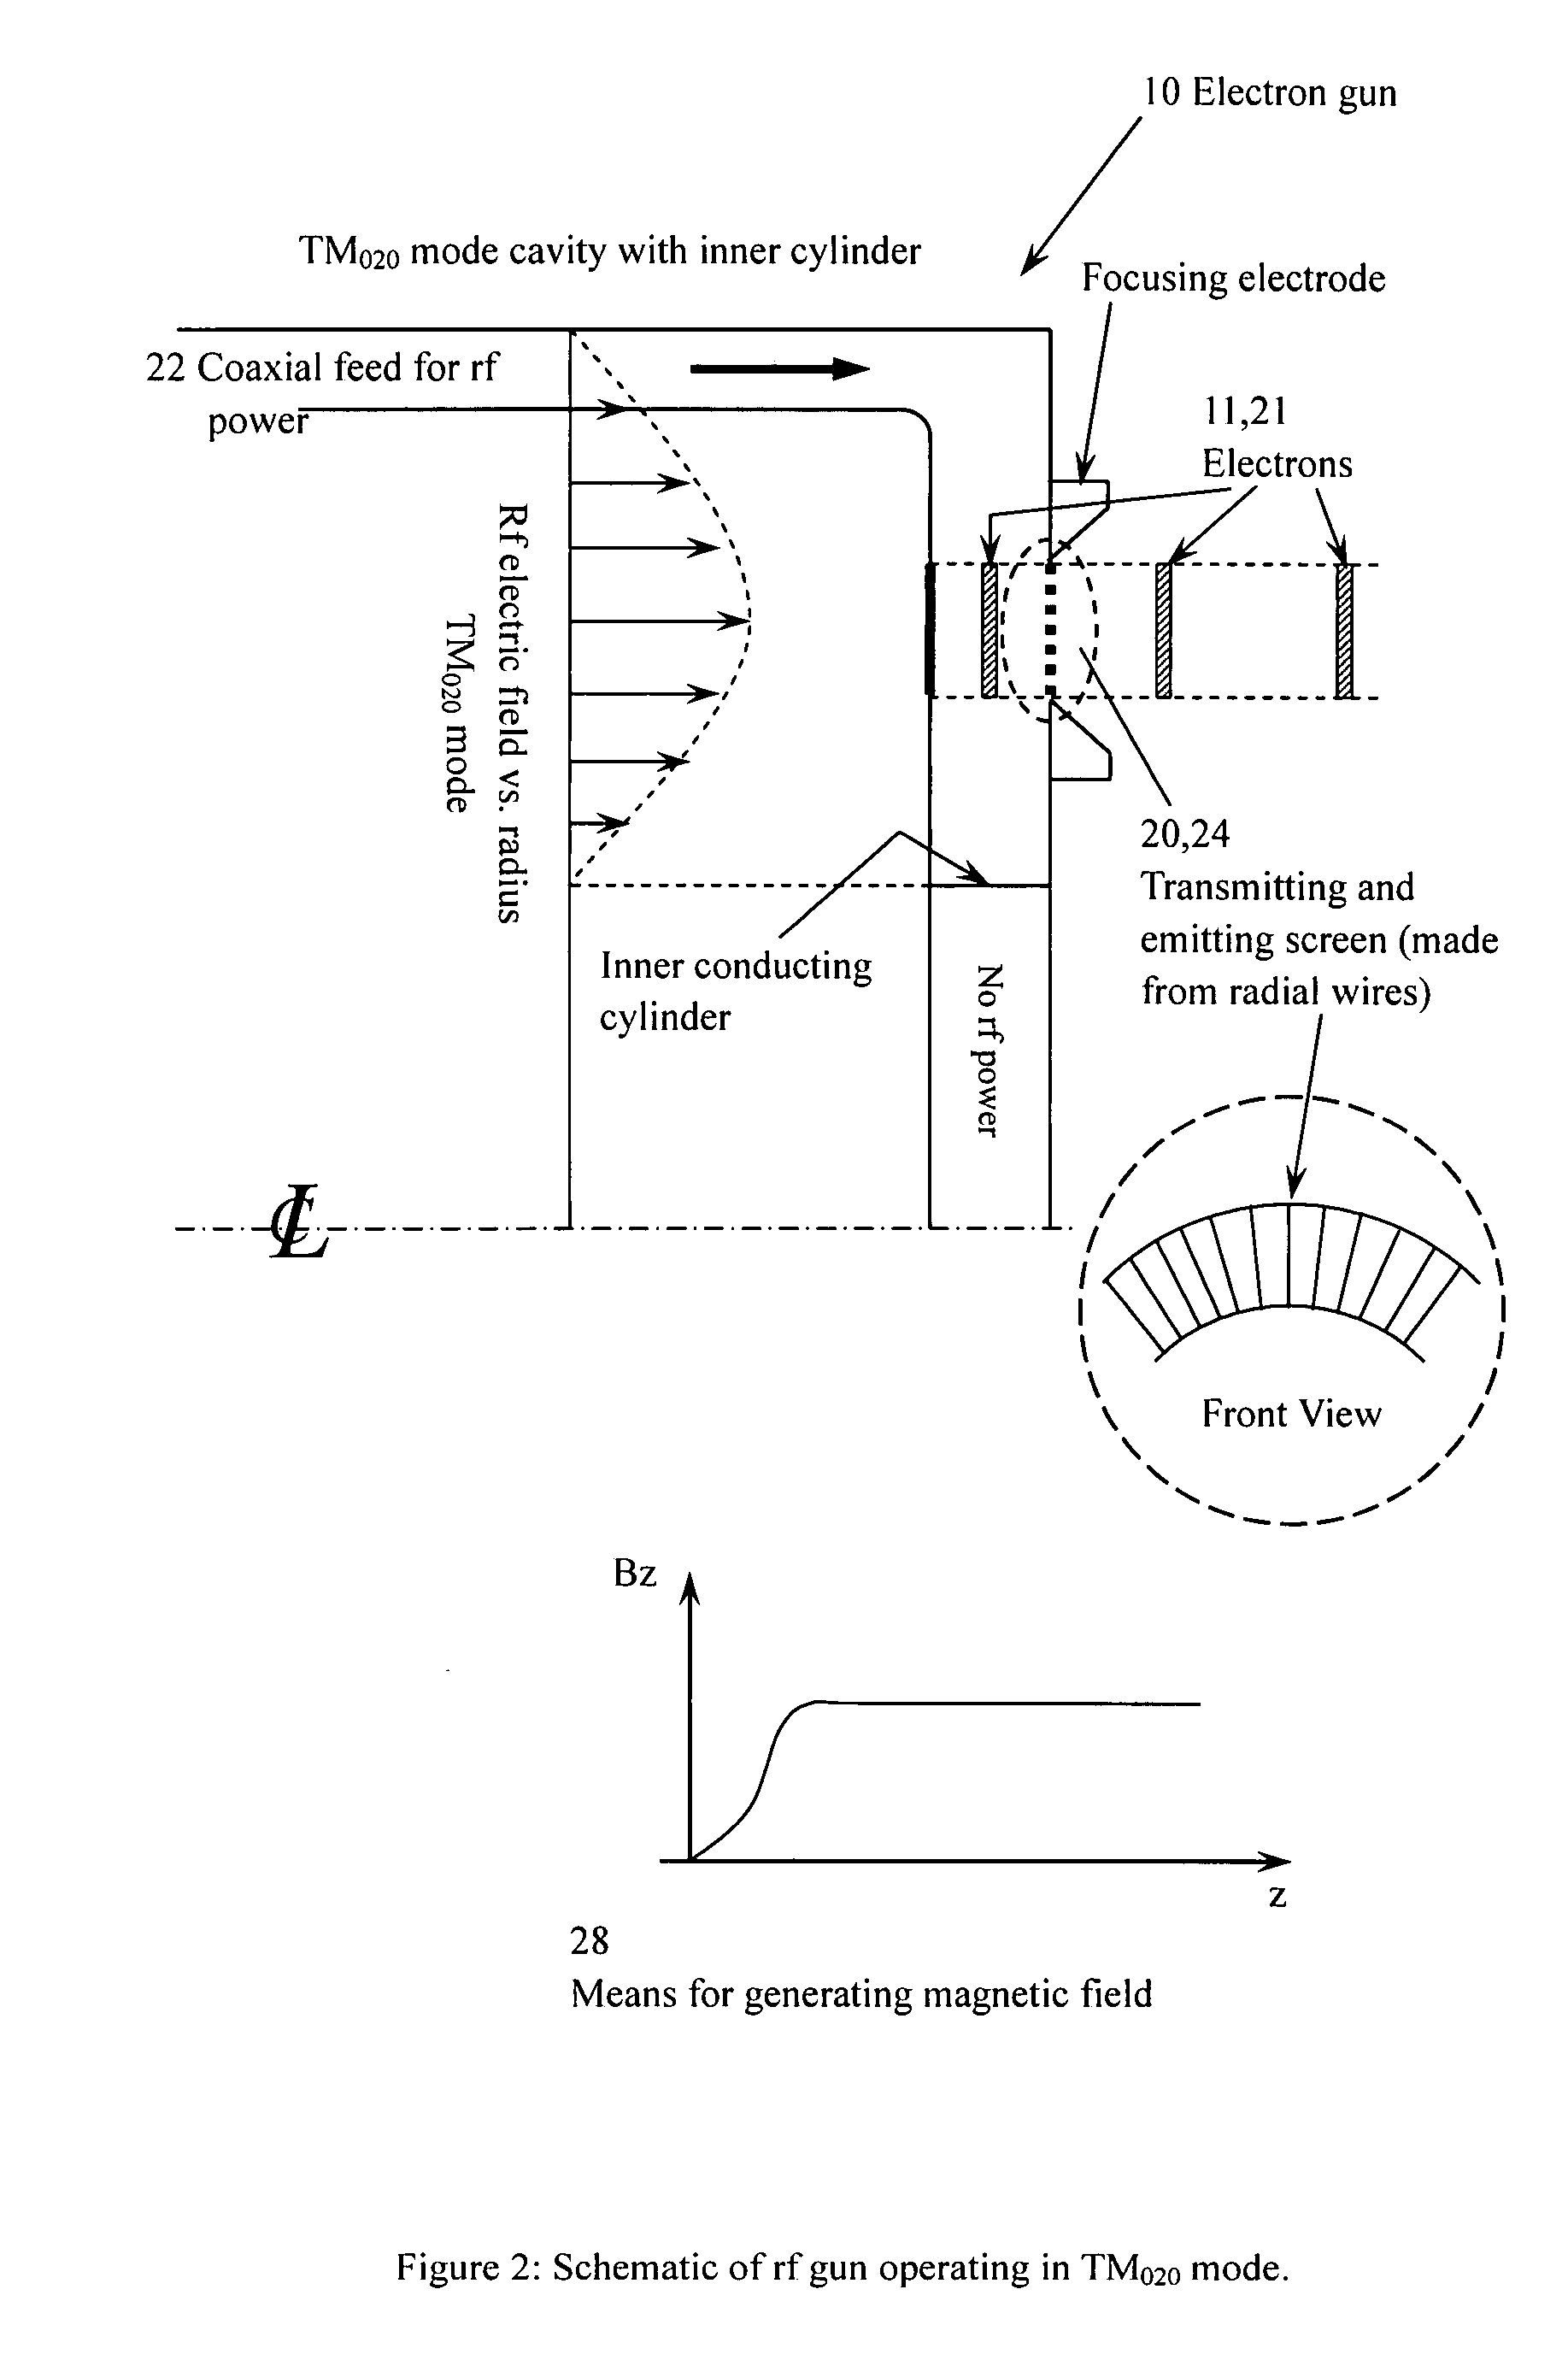 Electron gun for producing incident and secondary electrons